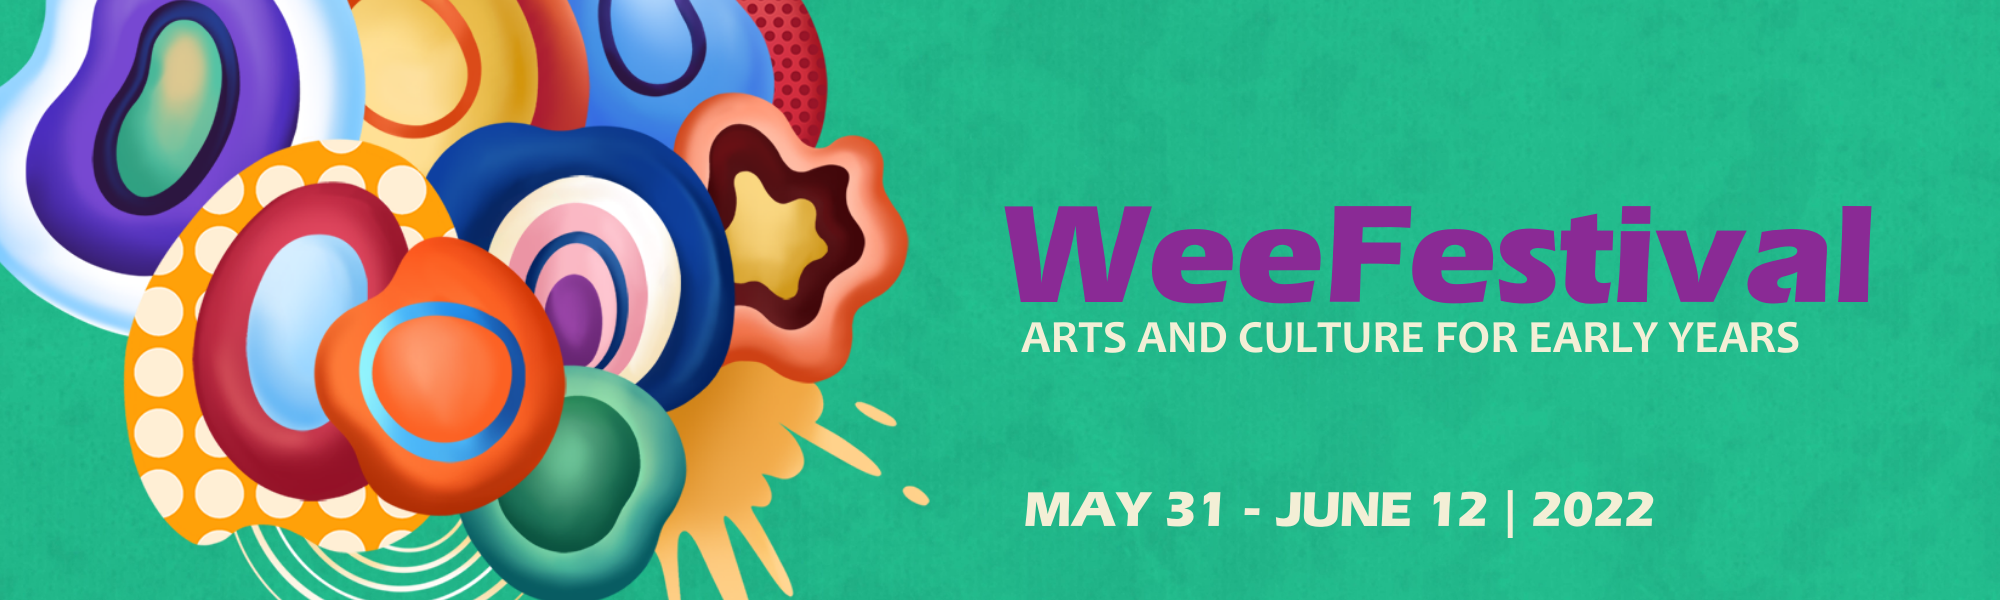 WeeFestival » Arts and Culture for Early Years